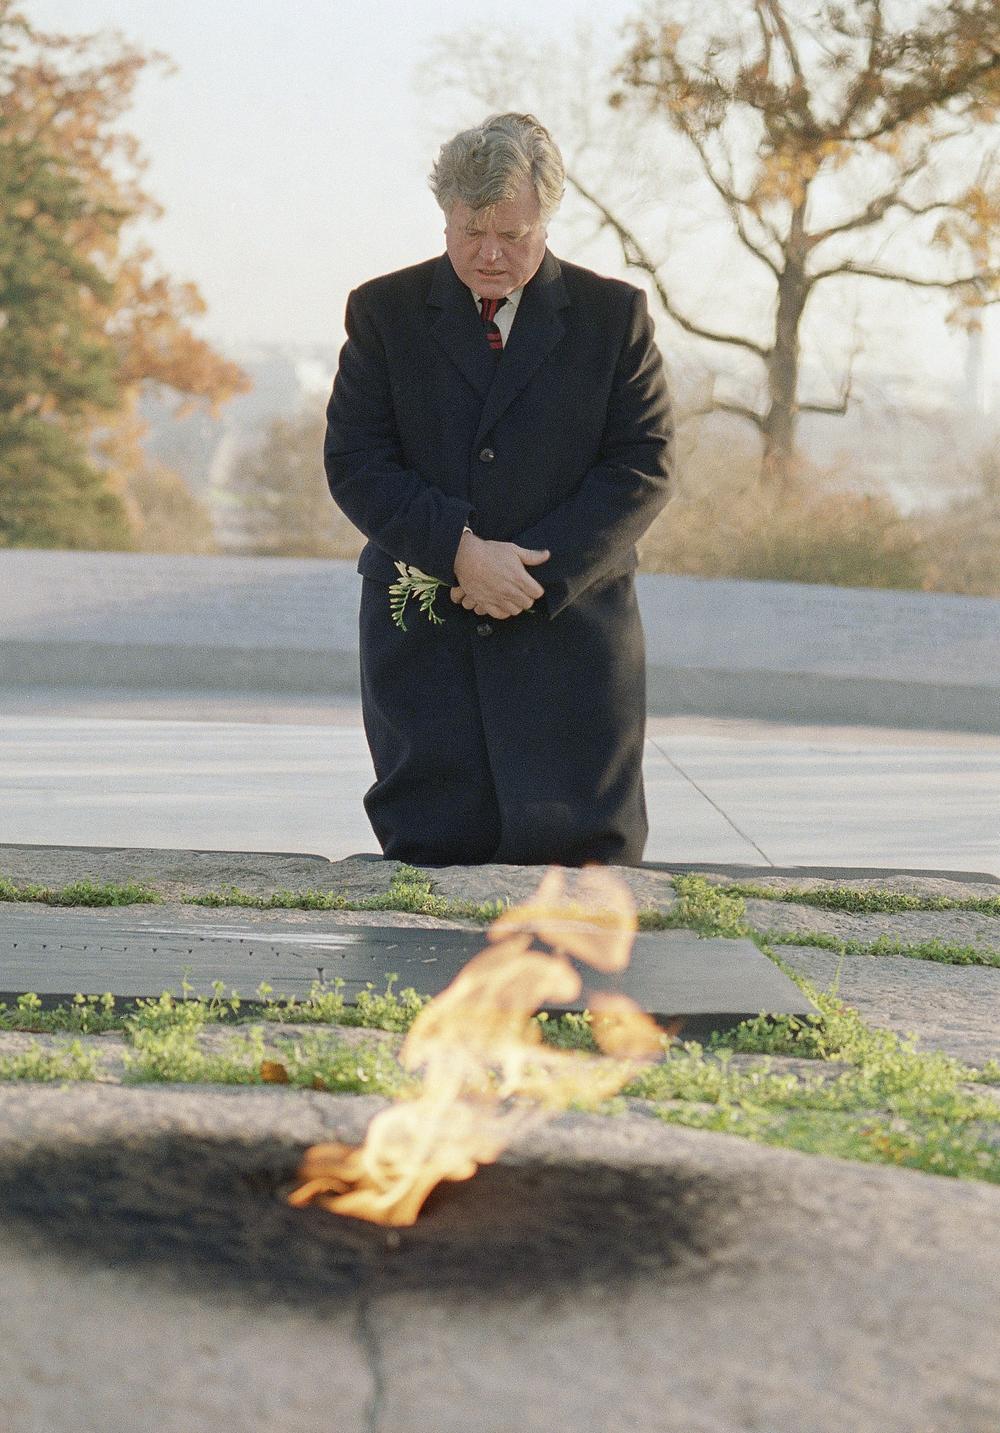 Sen. Edward Kennedy, D-Mass., Kneels at the gravesite of his brother, President John F. Kennedy, in  Arlington Cemetery Saturday, Nov. 22, 1986, the 23rd anniversary of the President's assassination in Dallas, Texas.   In foreground is the eternal flame that marks the grave.  (AP)